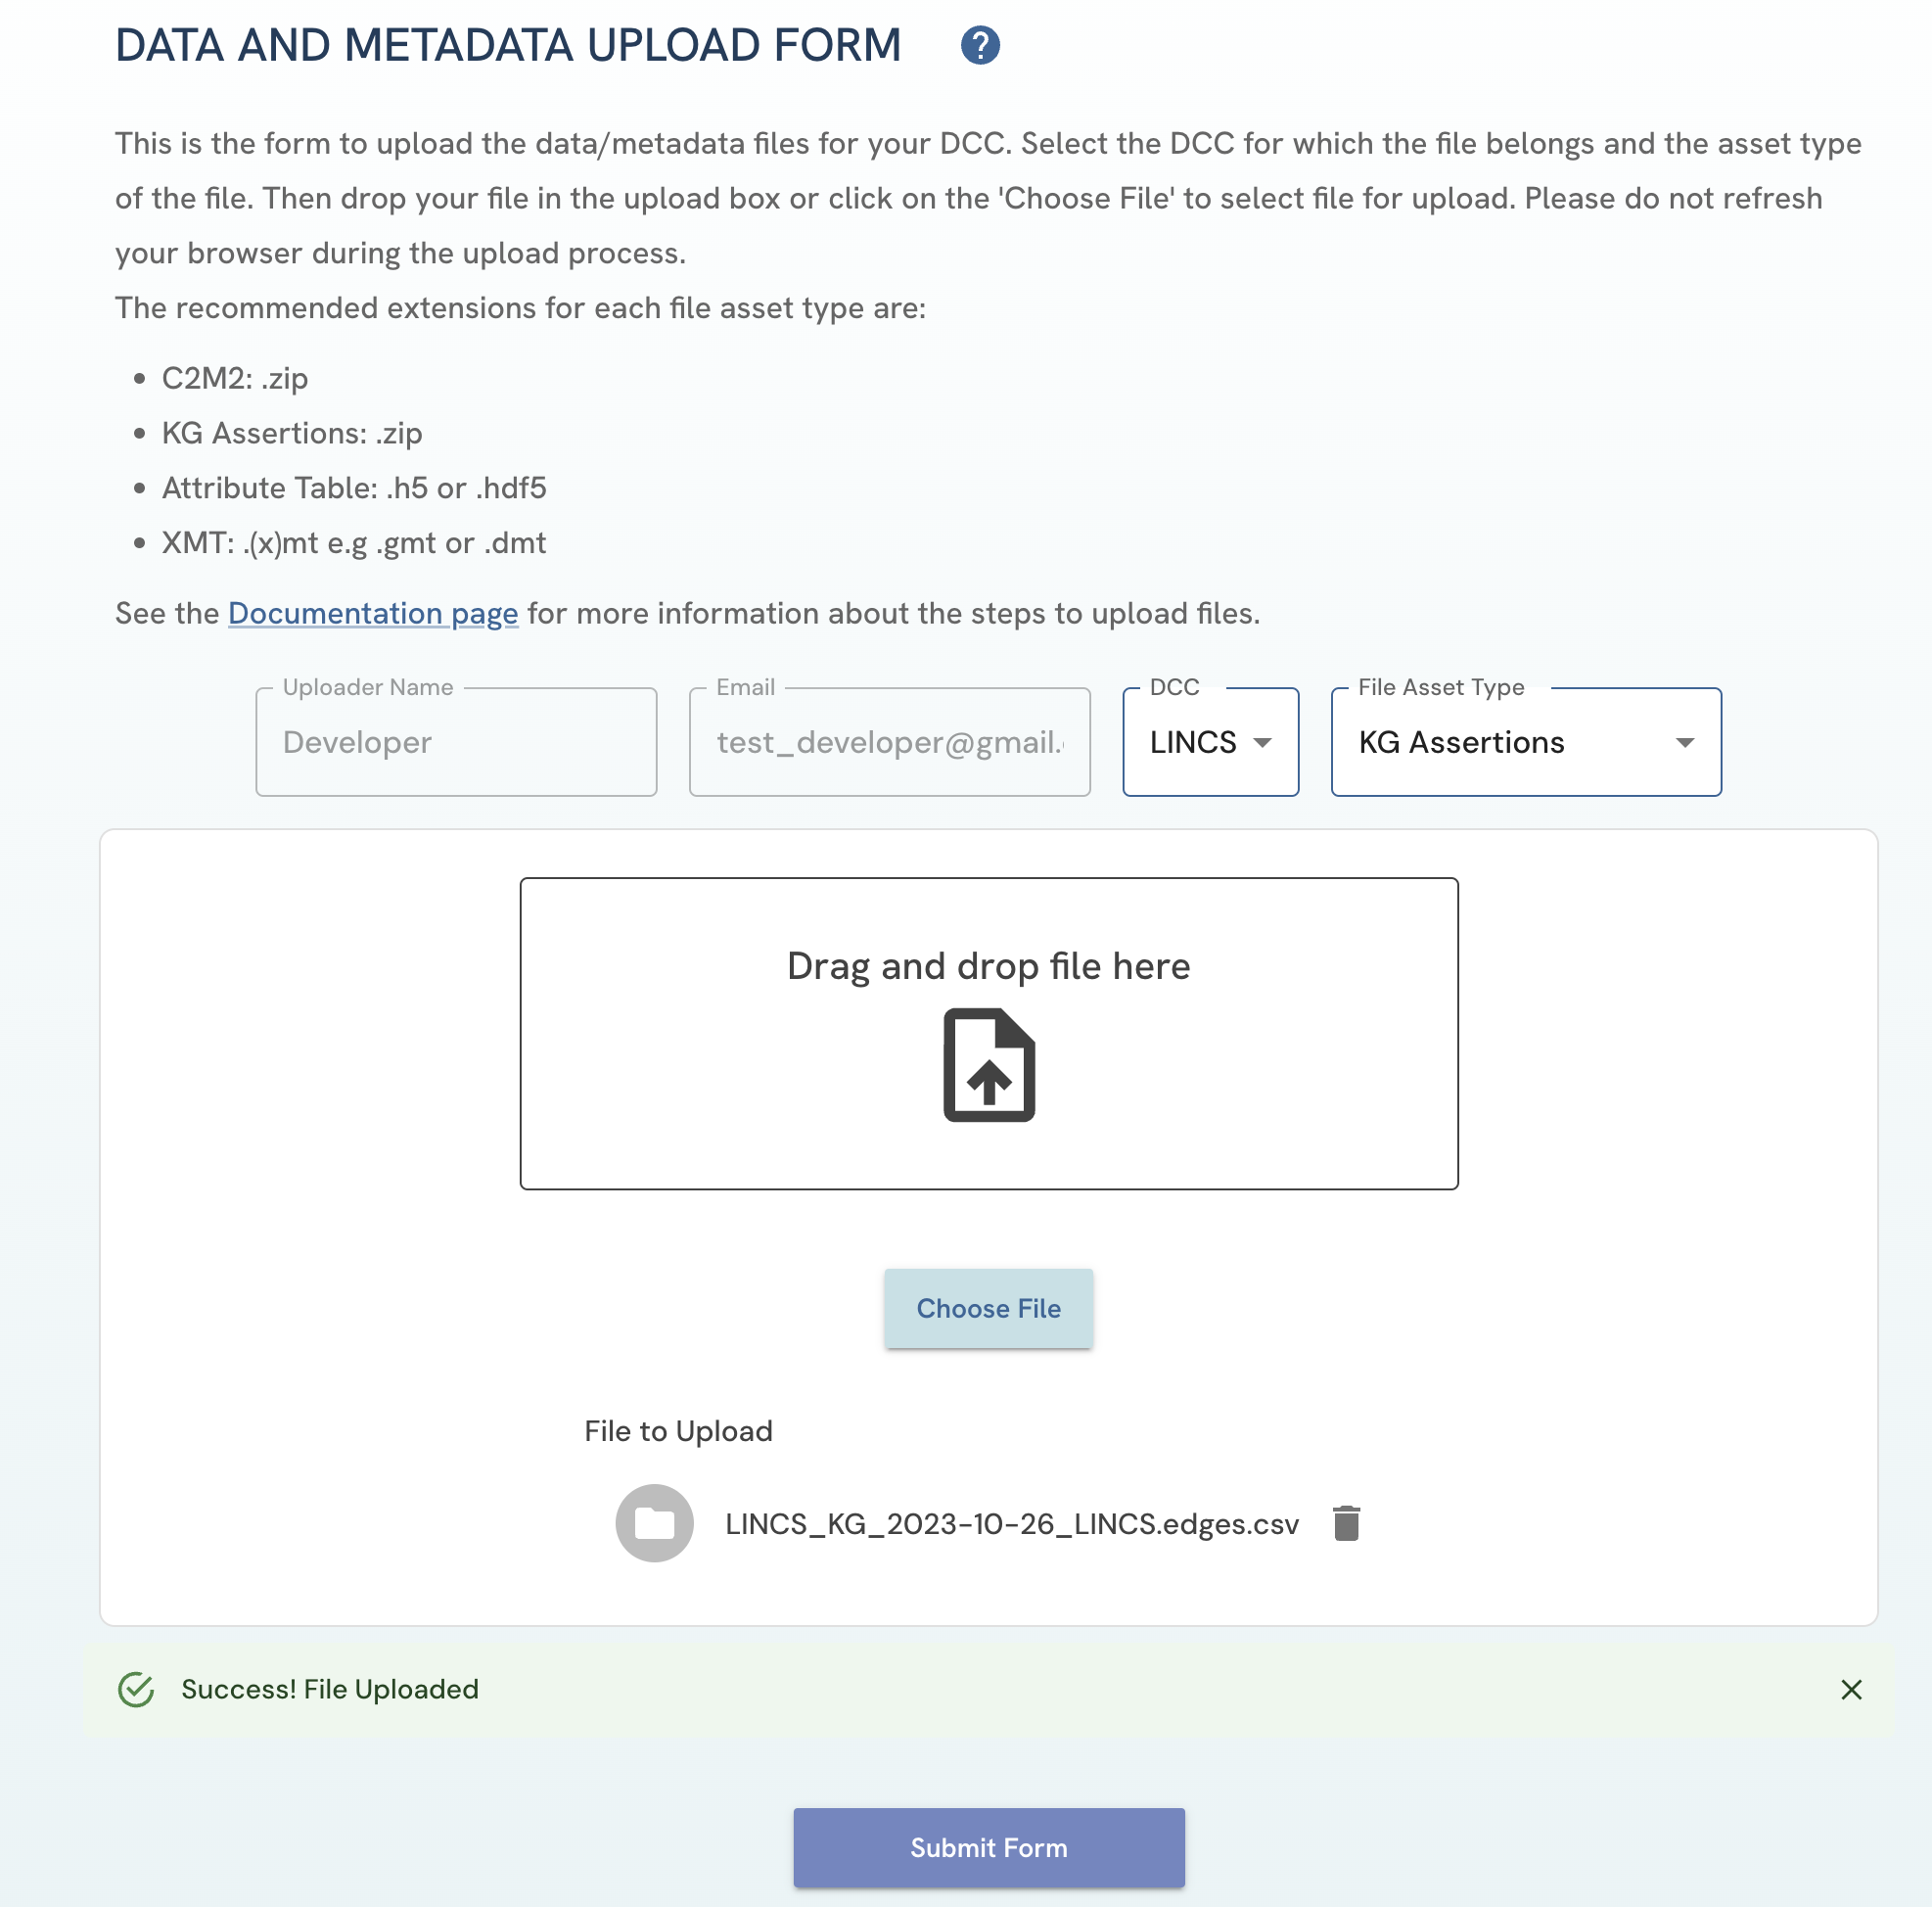 A screenshot of Data and Metadata Upload Form showing successful file upload banner